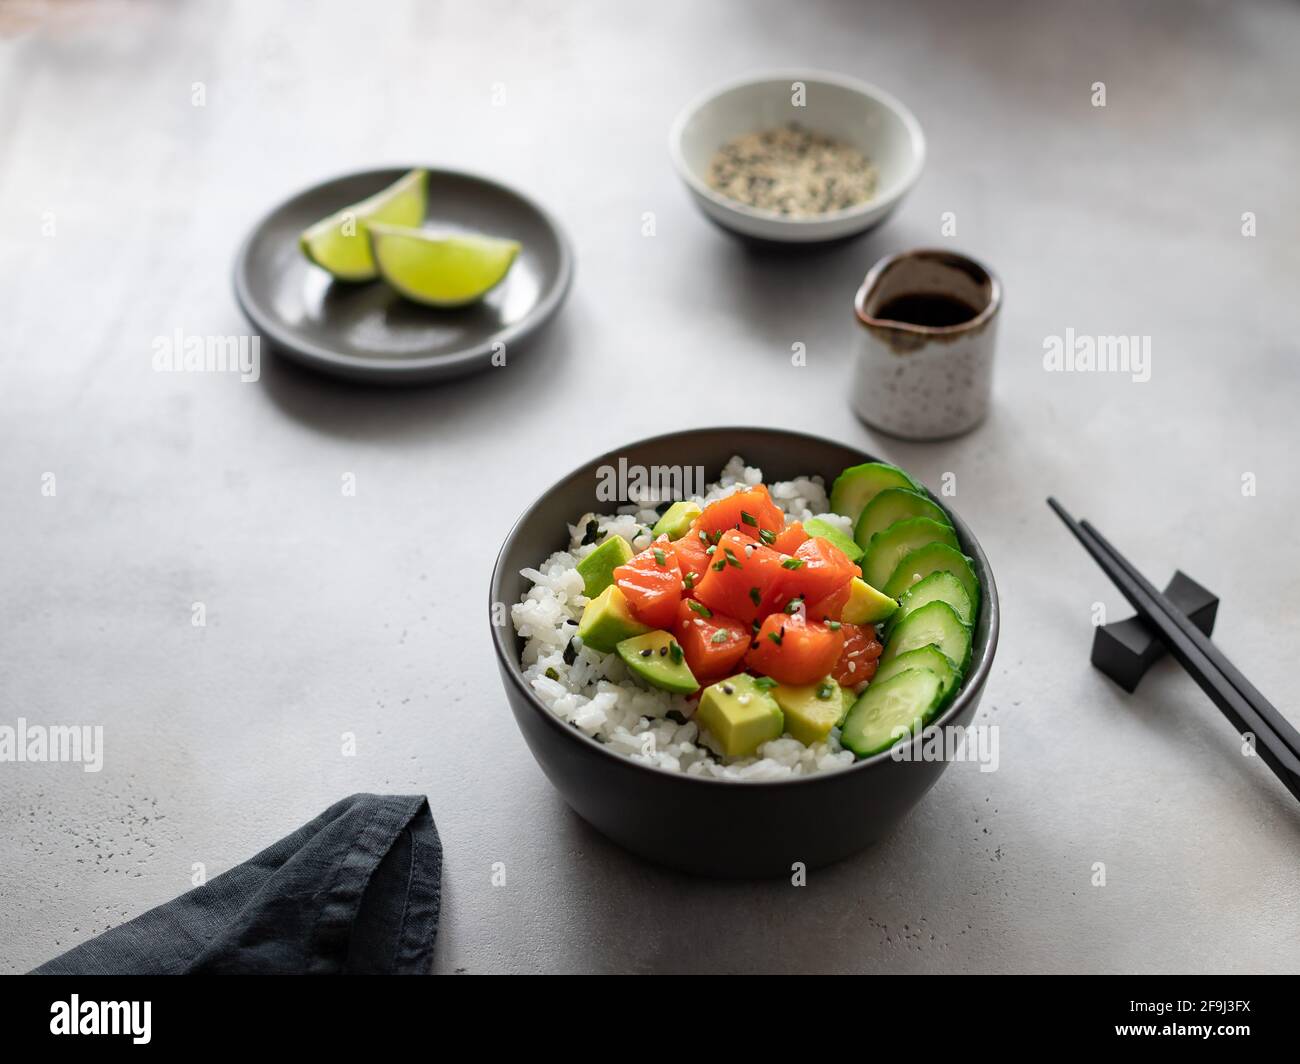 salmon fish poke bowl with avocado, cucumber, rice, sesame seeds and soy sauce on gray background. traditional asian food. side view, horizontal image Stock Photo